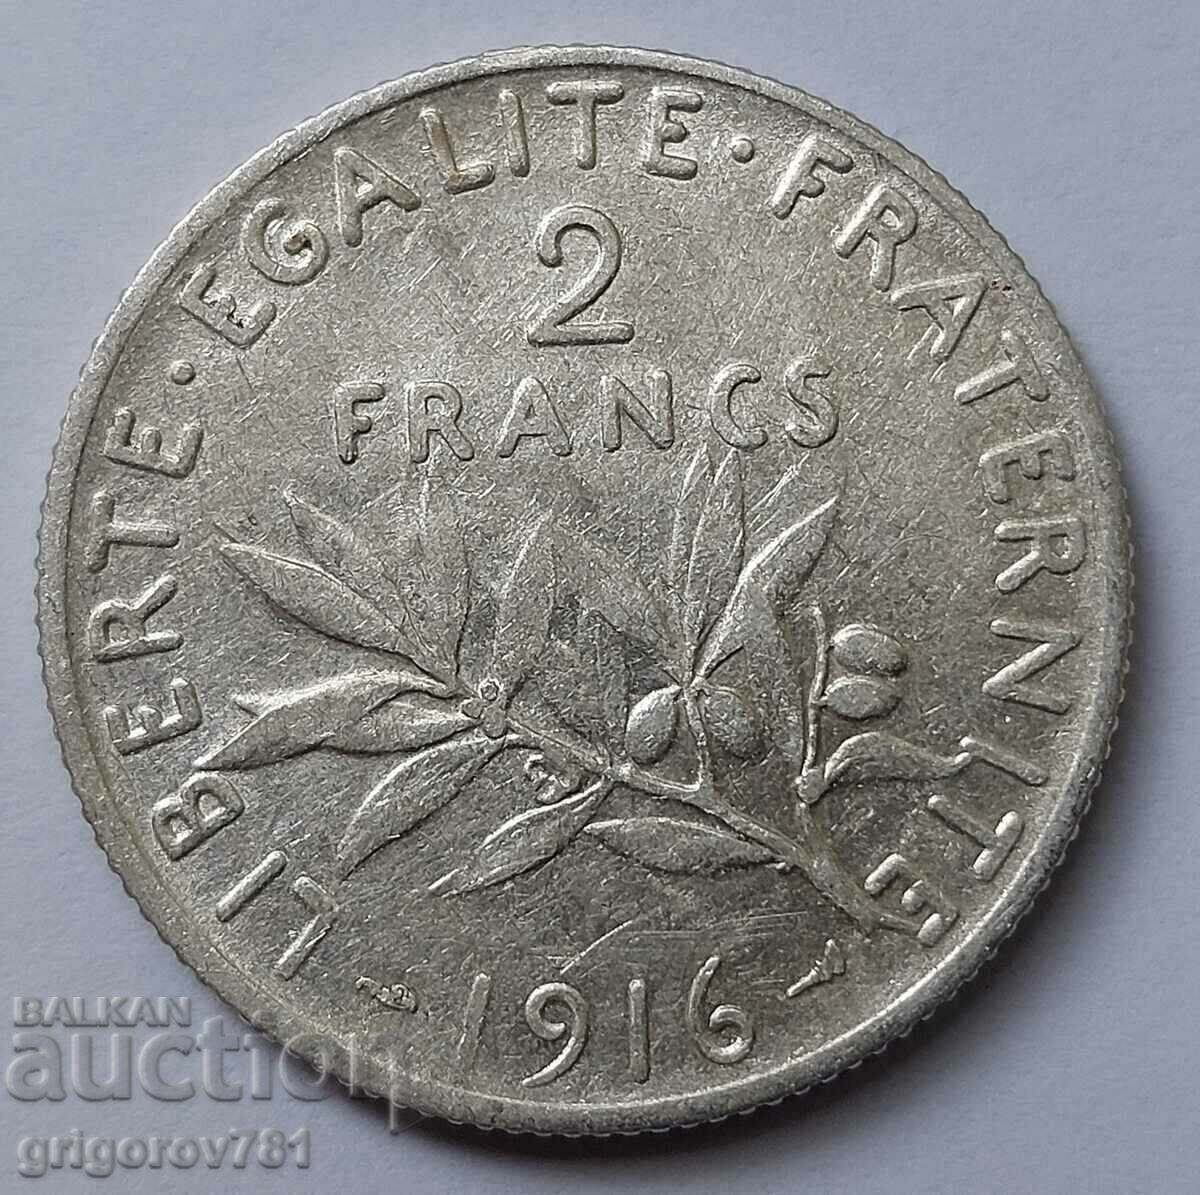 2 Francs Silver France 1916 - Silver Coin #33